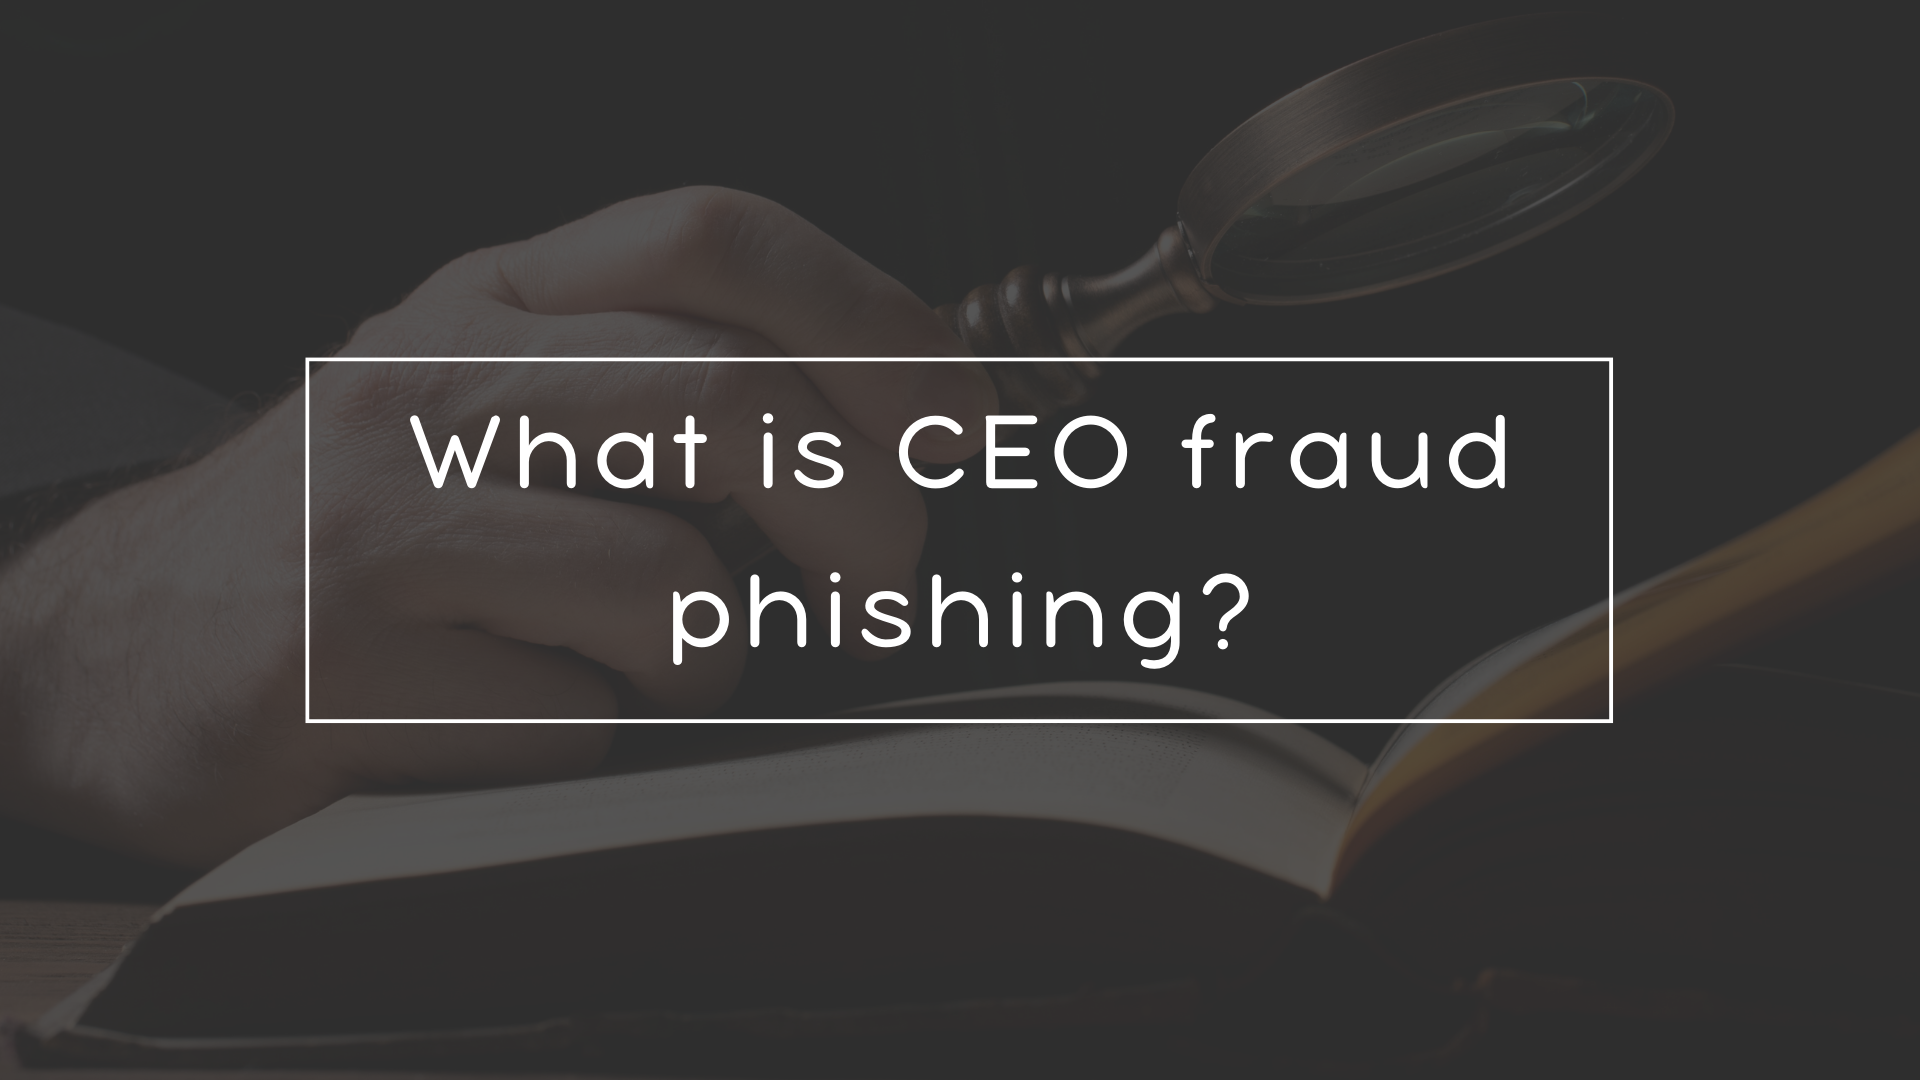 What is CEO fraud phishing?